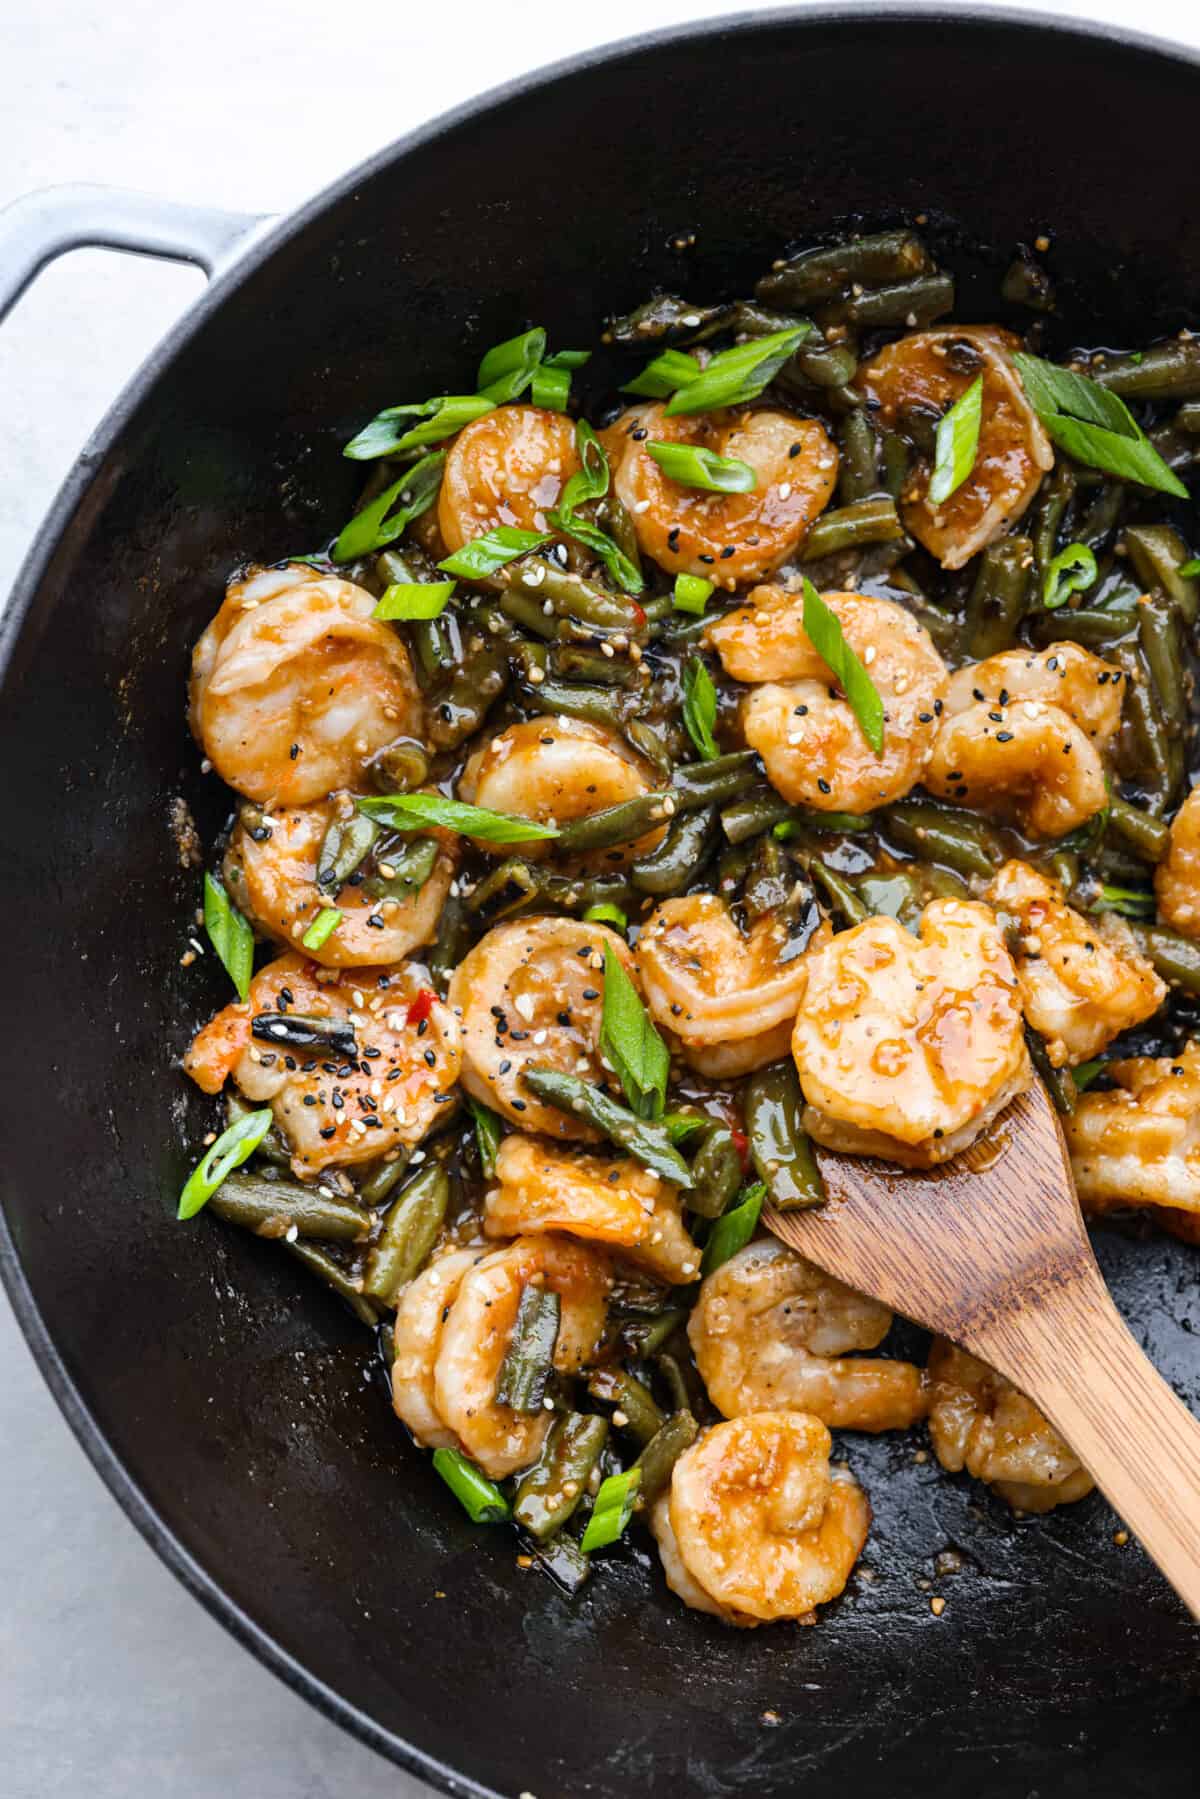 Cooked Hunan shrimp and green beans in a black skillet.